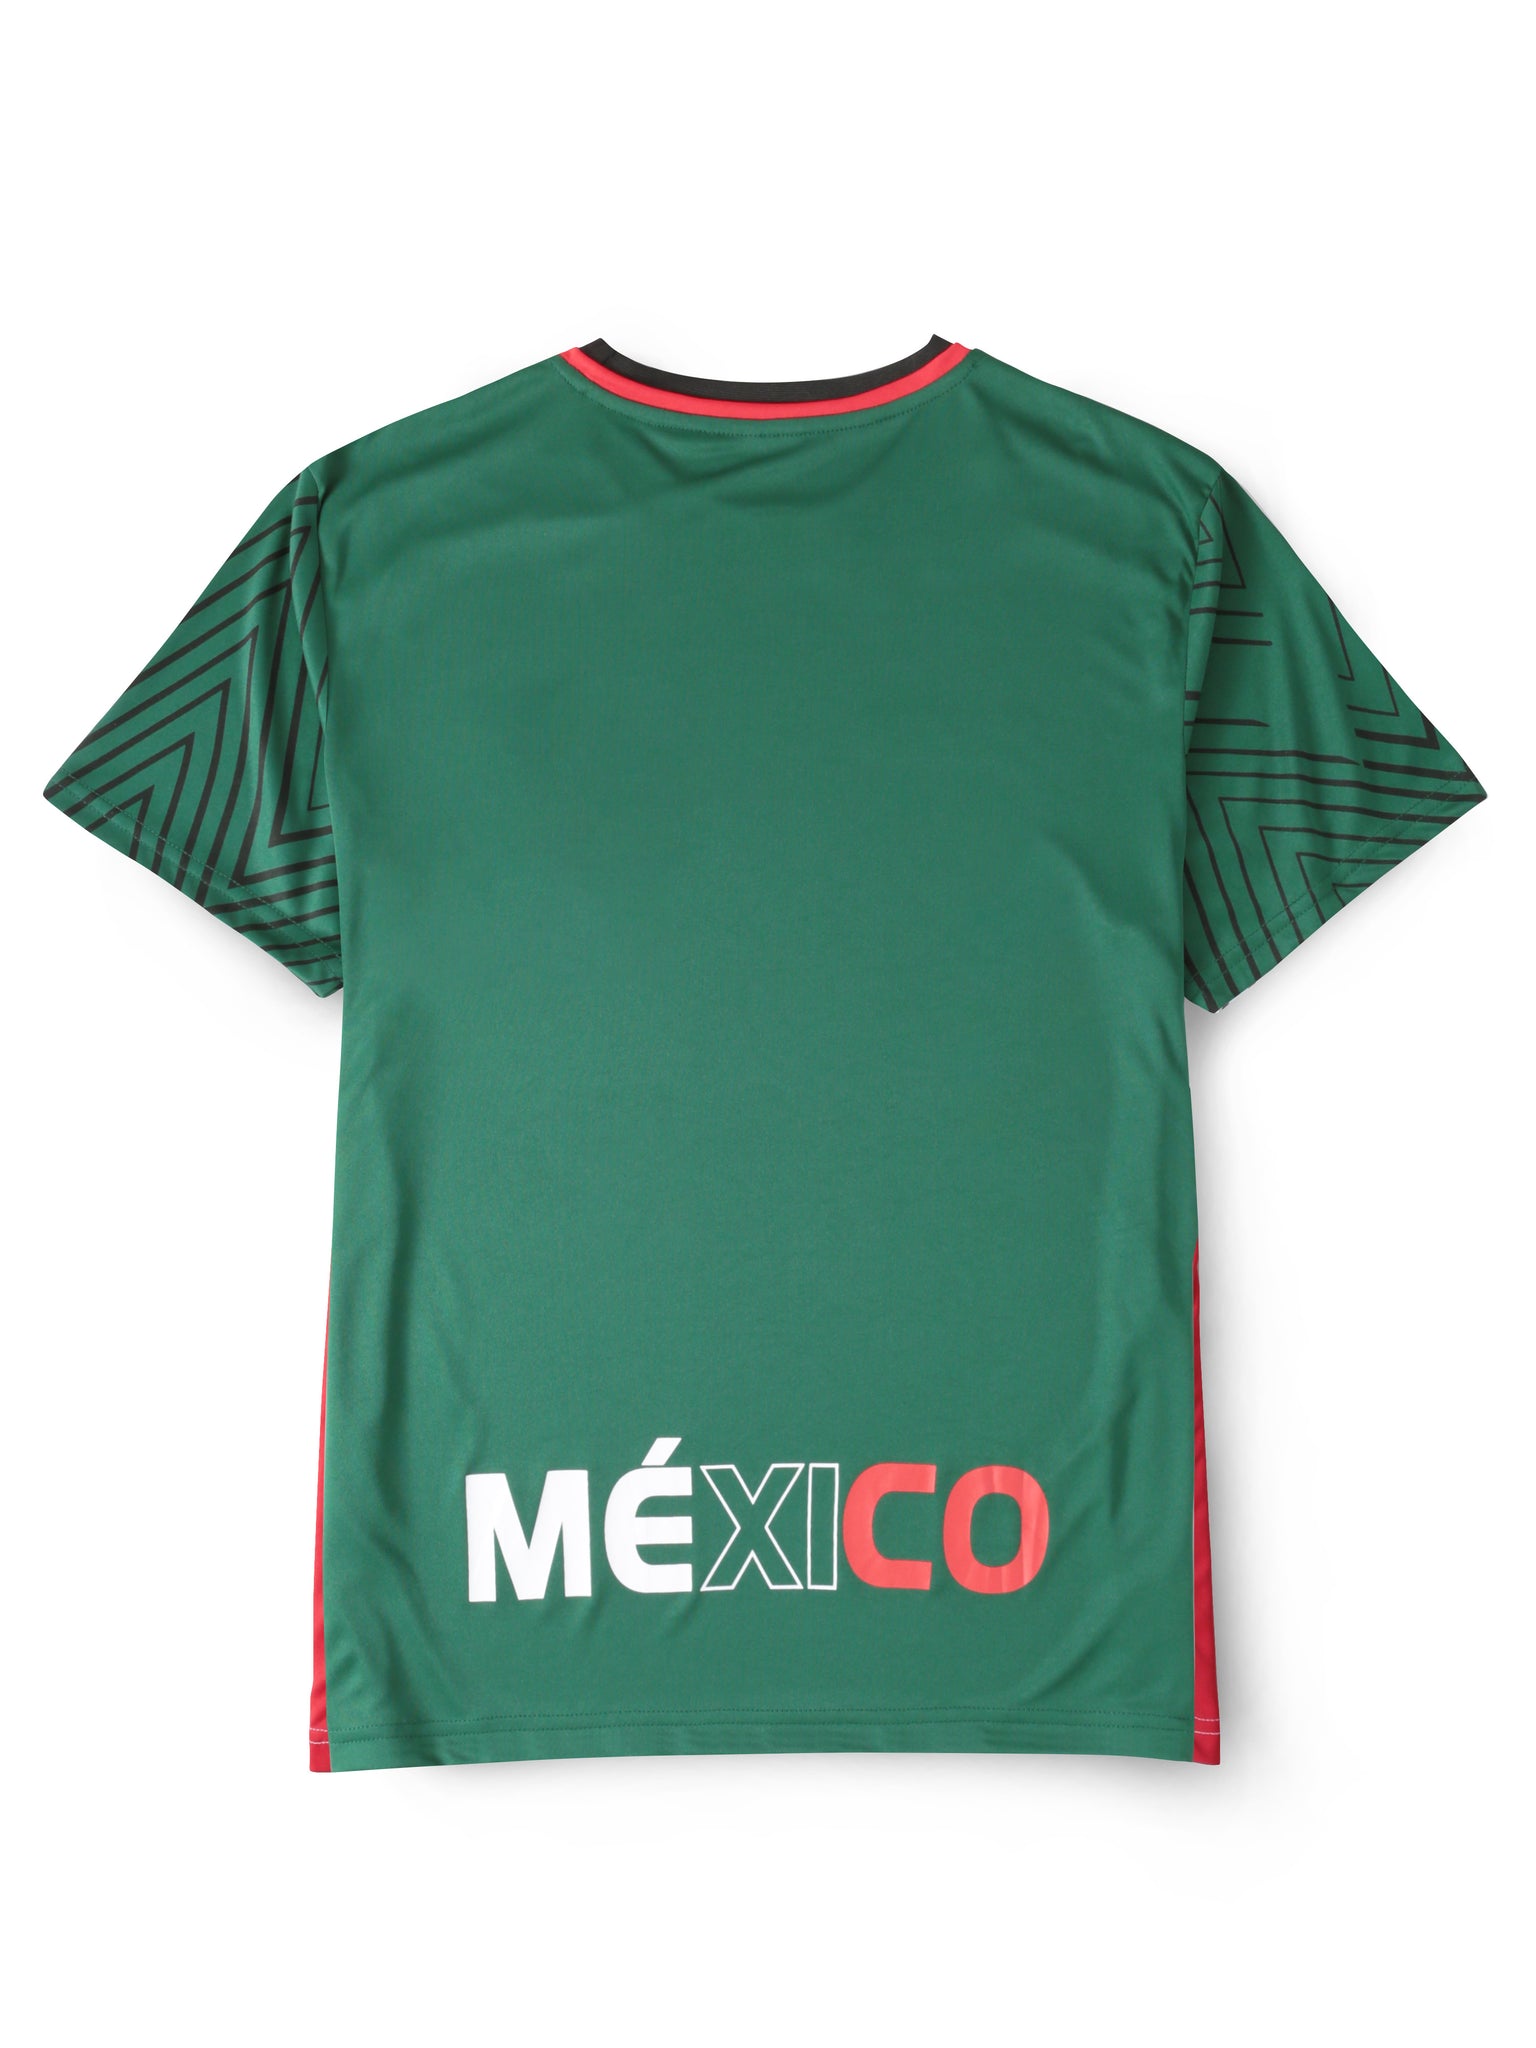 Other, Mexico Red And Black Jersey